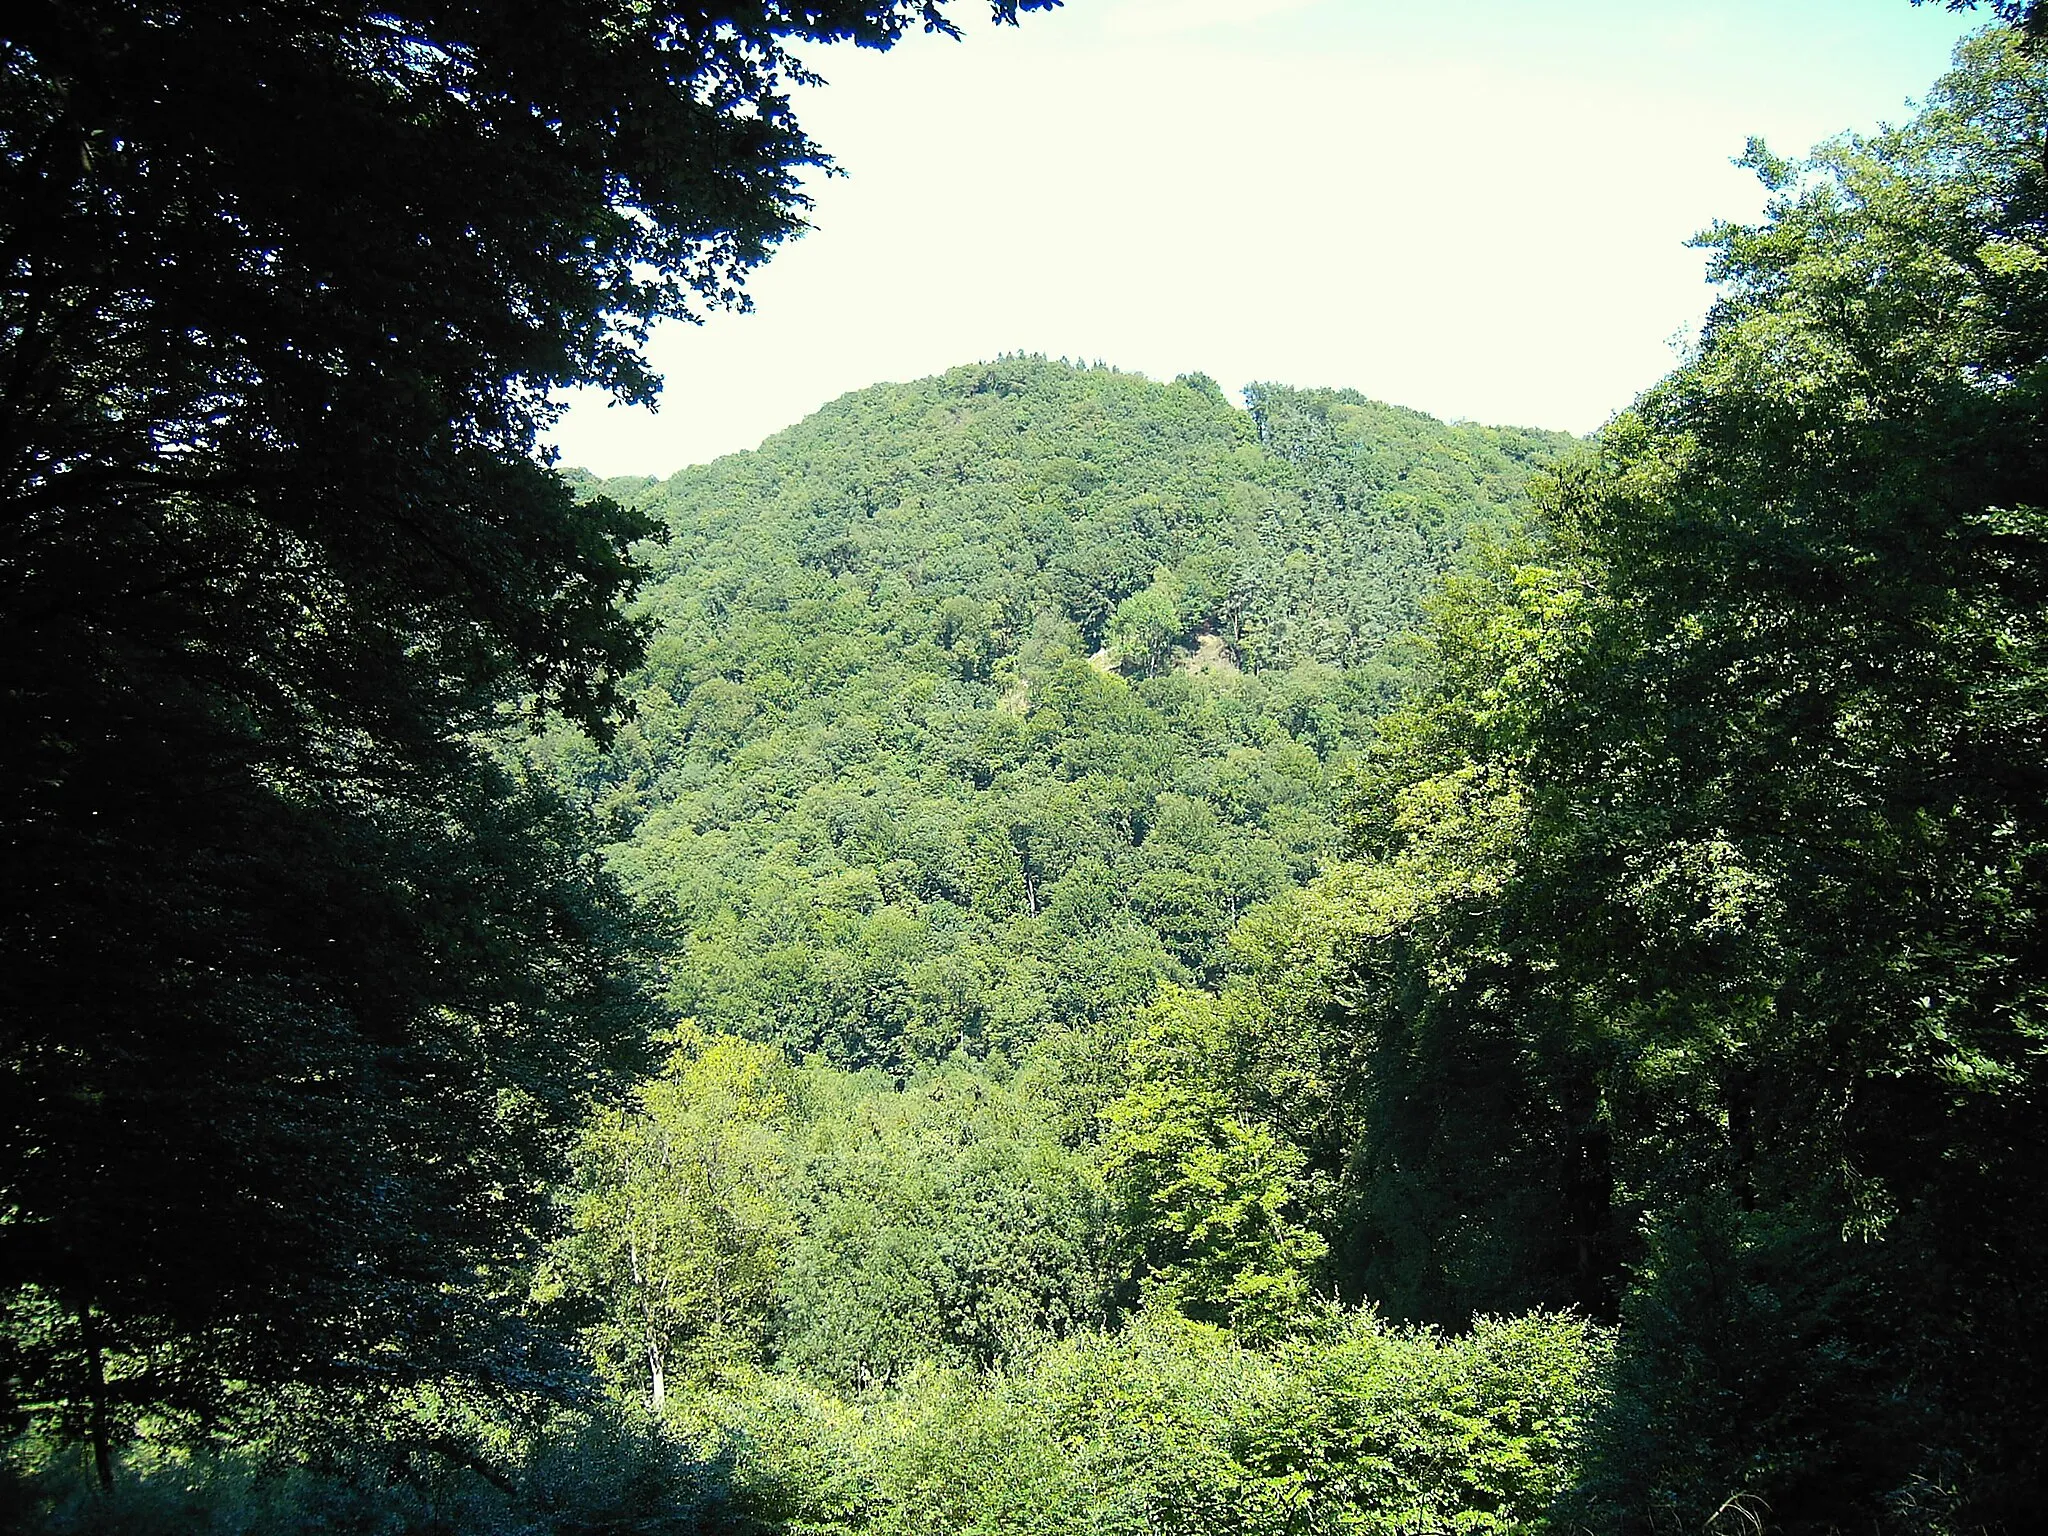 Photo showing: The hill Geisberg in the Siebengebirge seen from a foottrack below the hill Großer Breiberg.